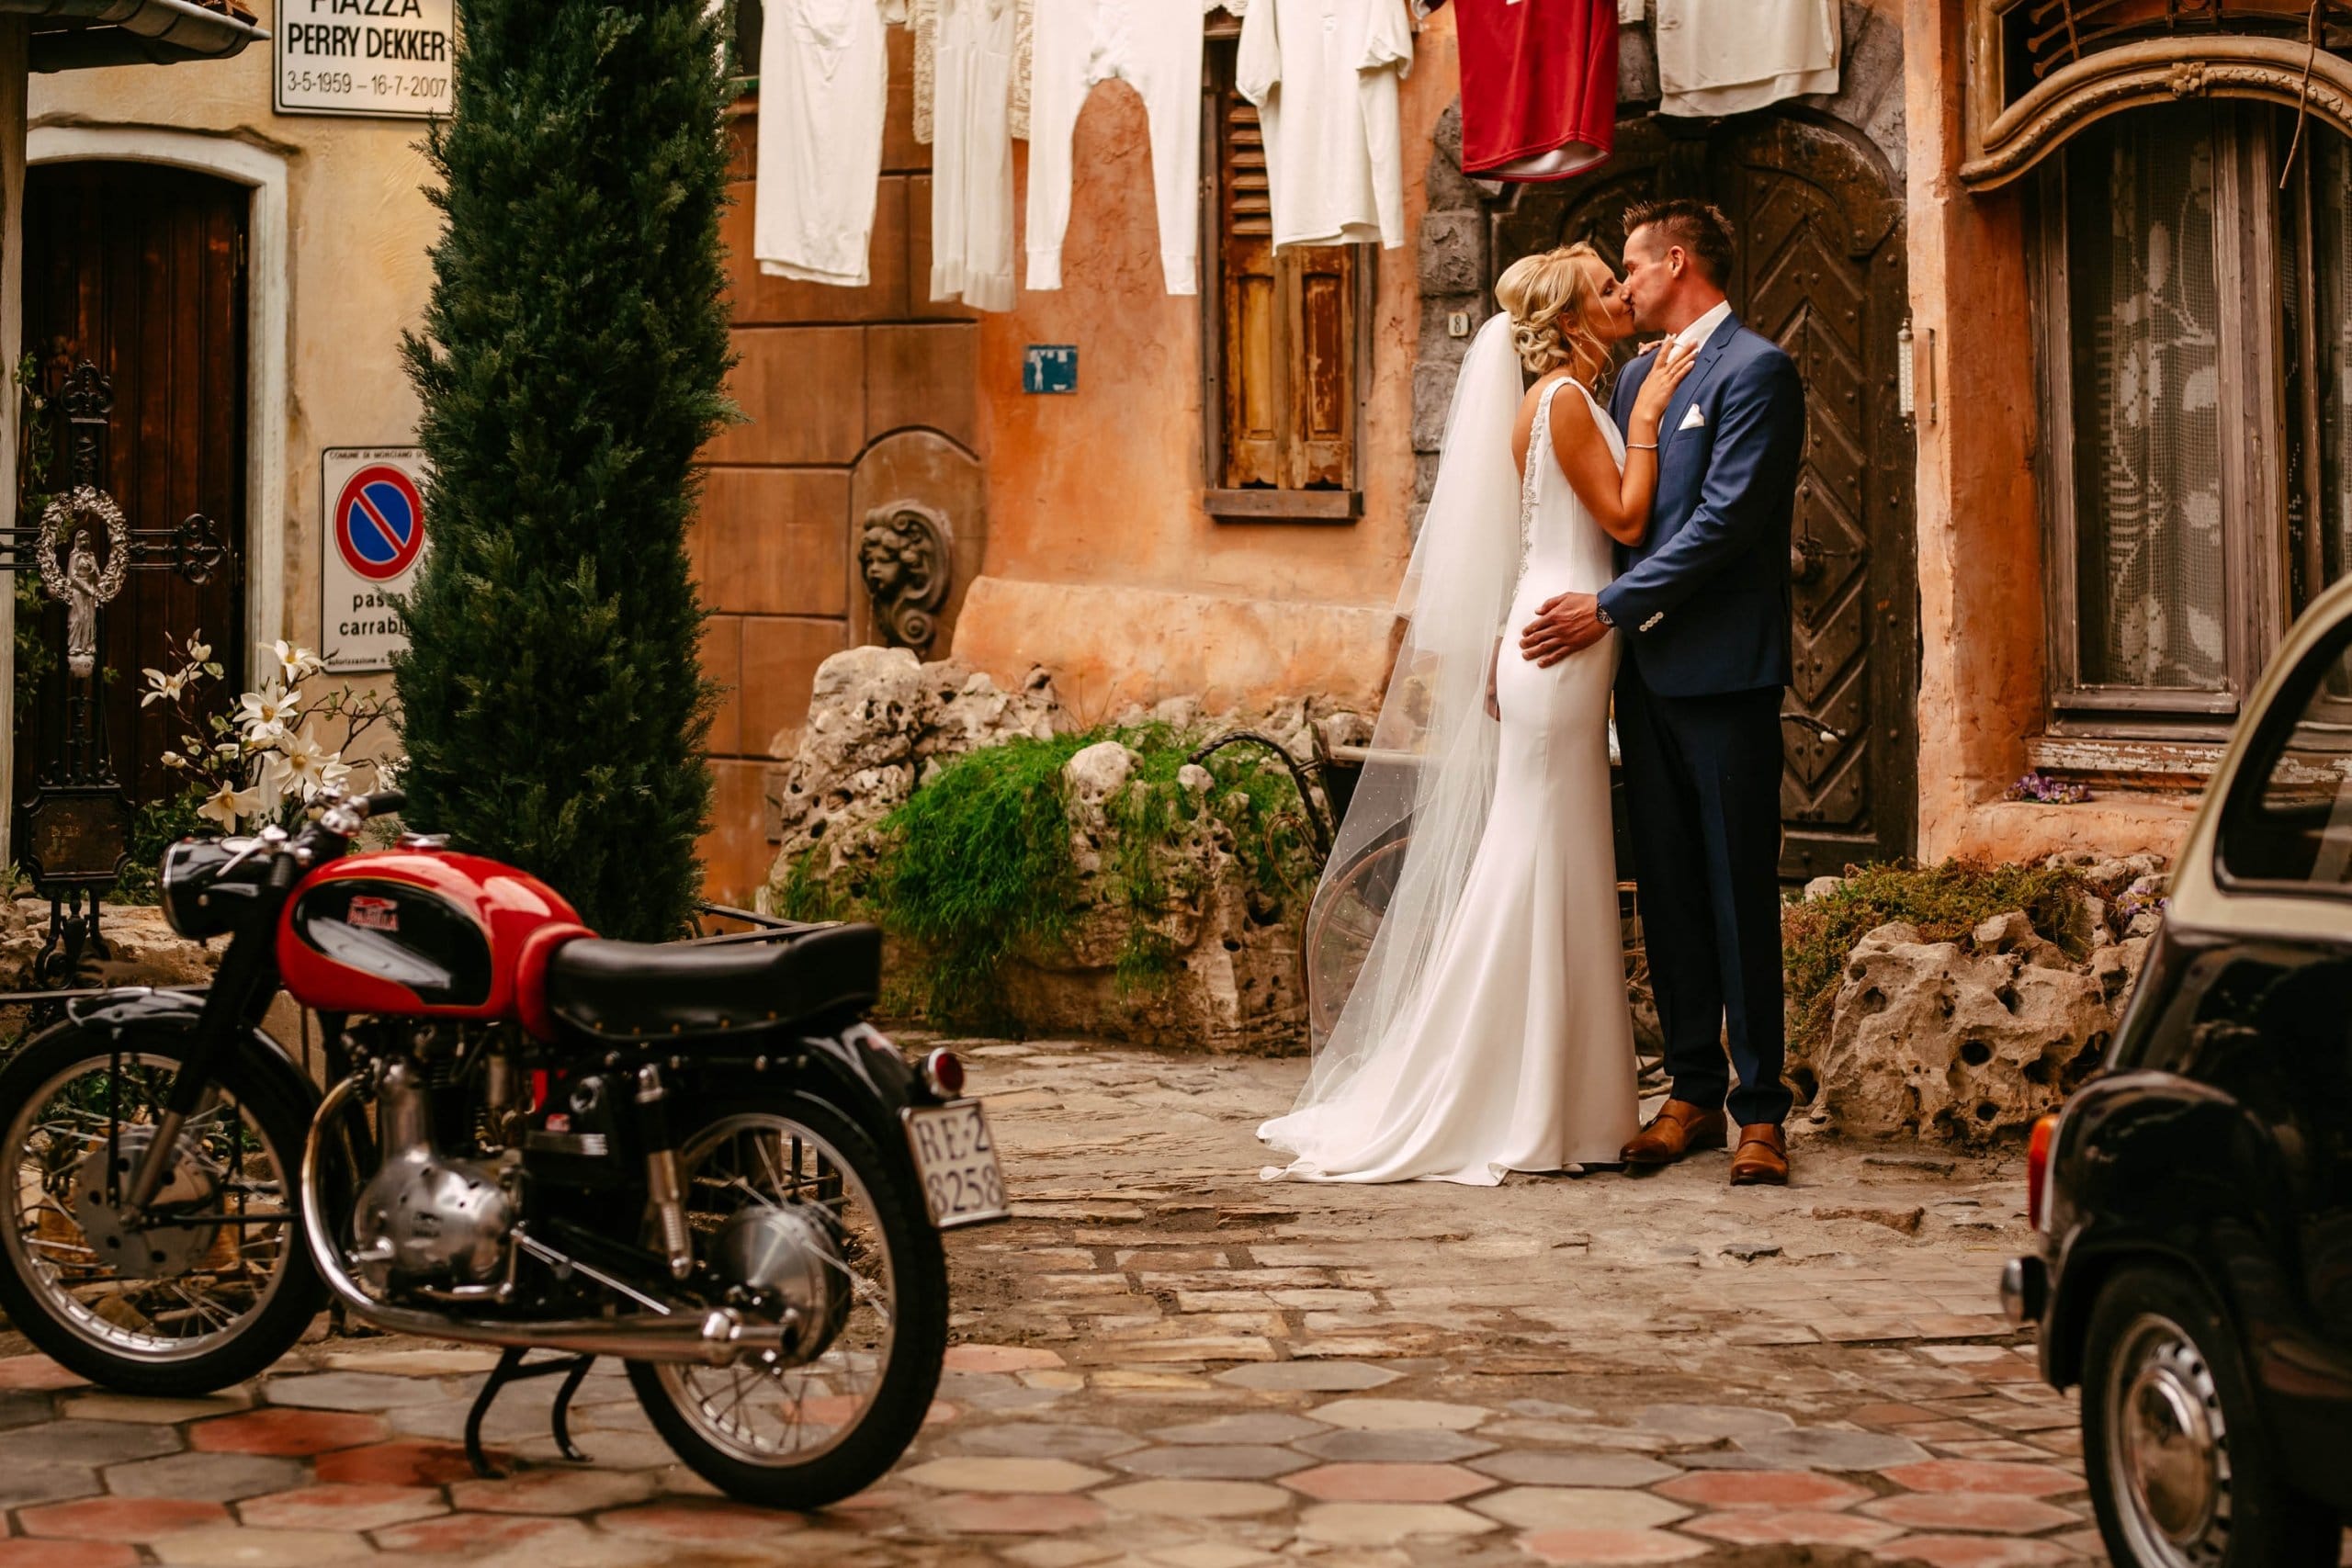 A bride and groom kiss in front of a motorbike.